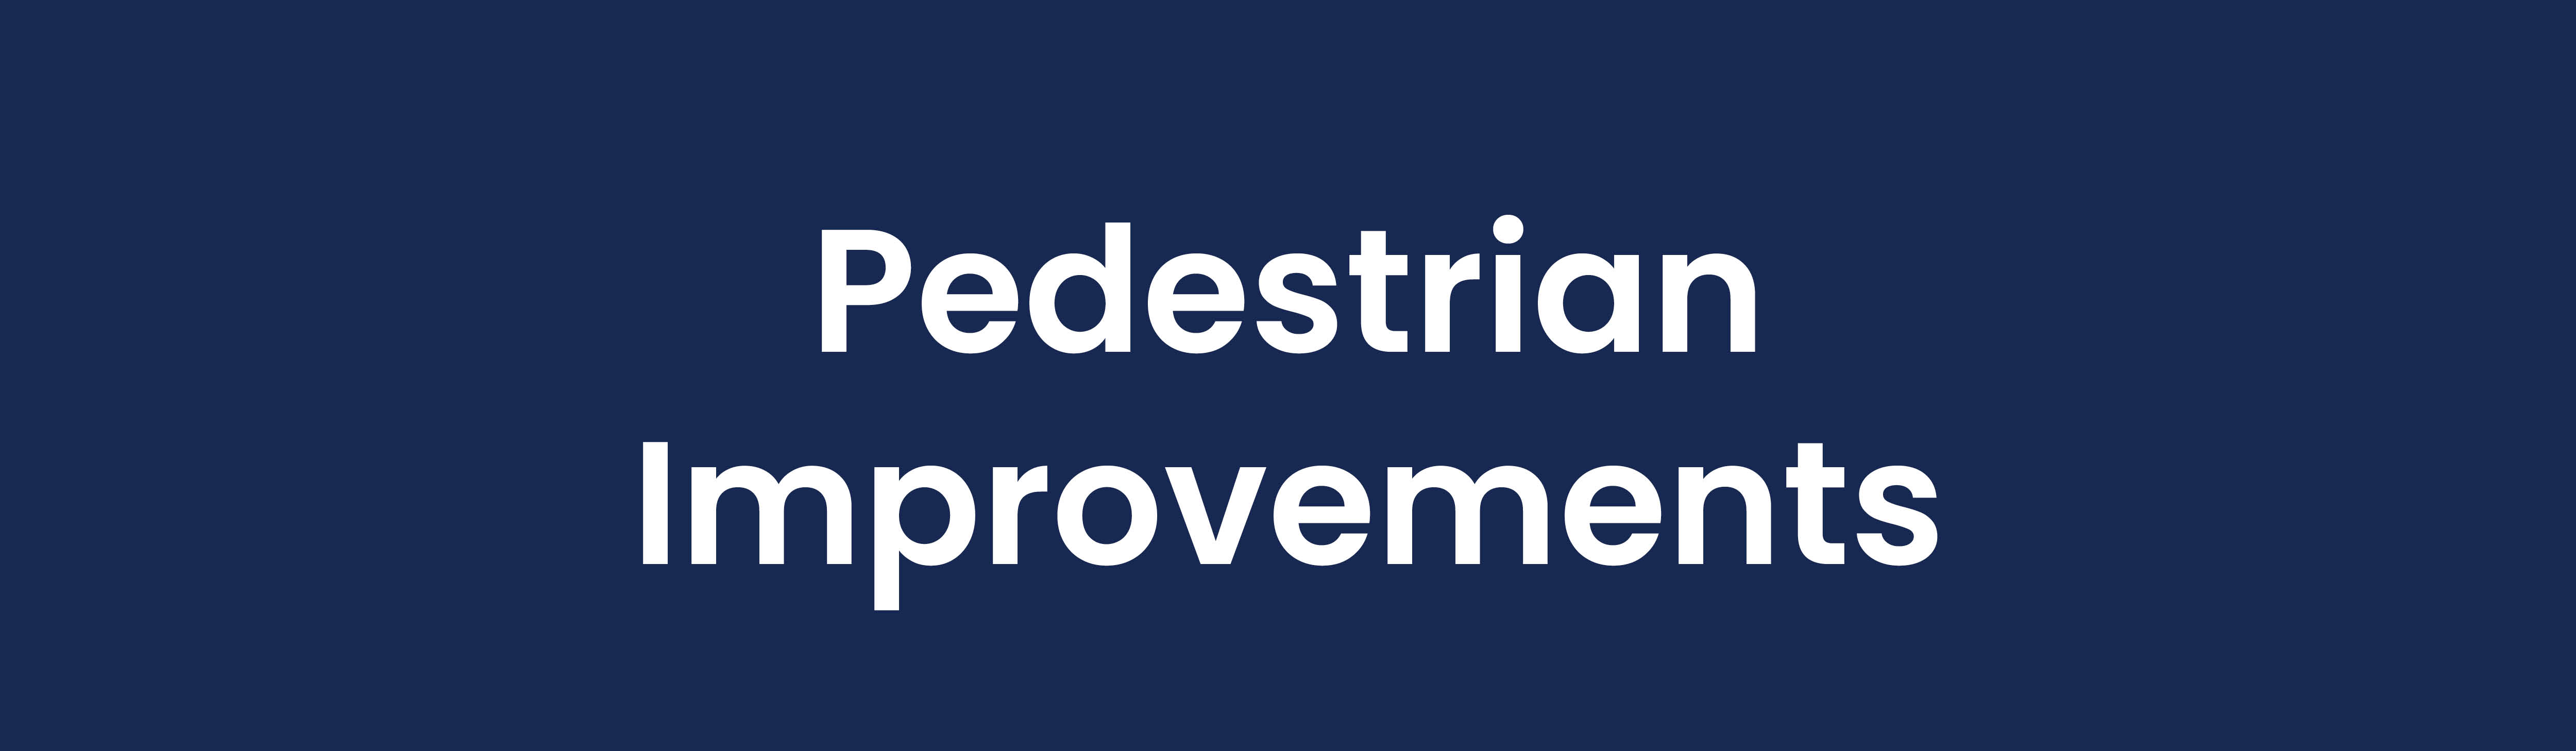 Button that reads Pedestrian Improvements and links to that corresponding page of the website